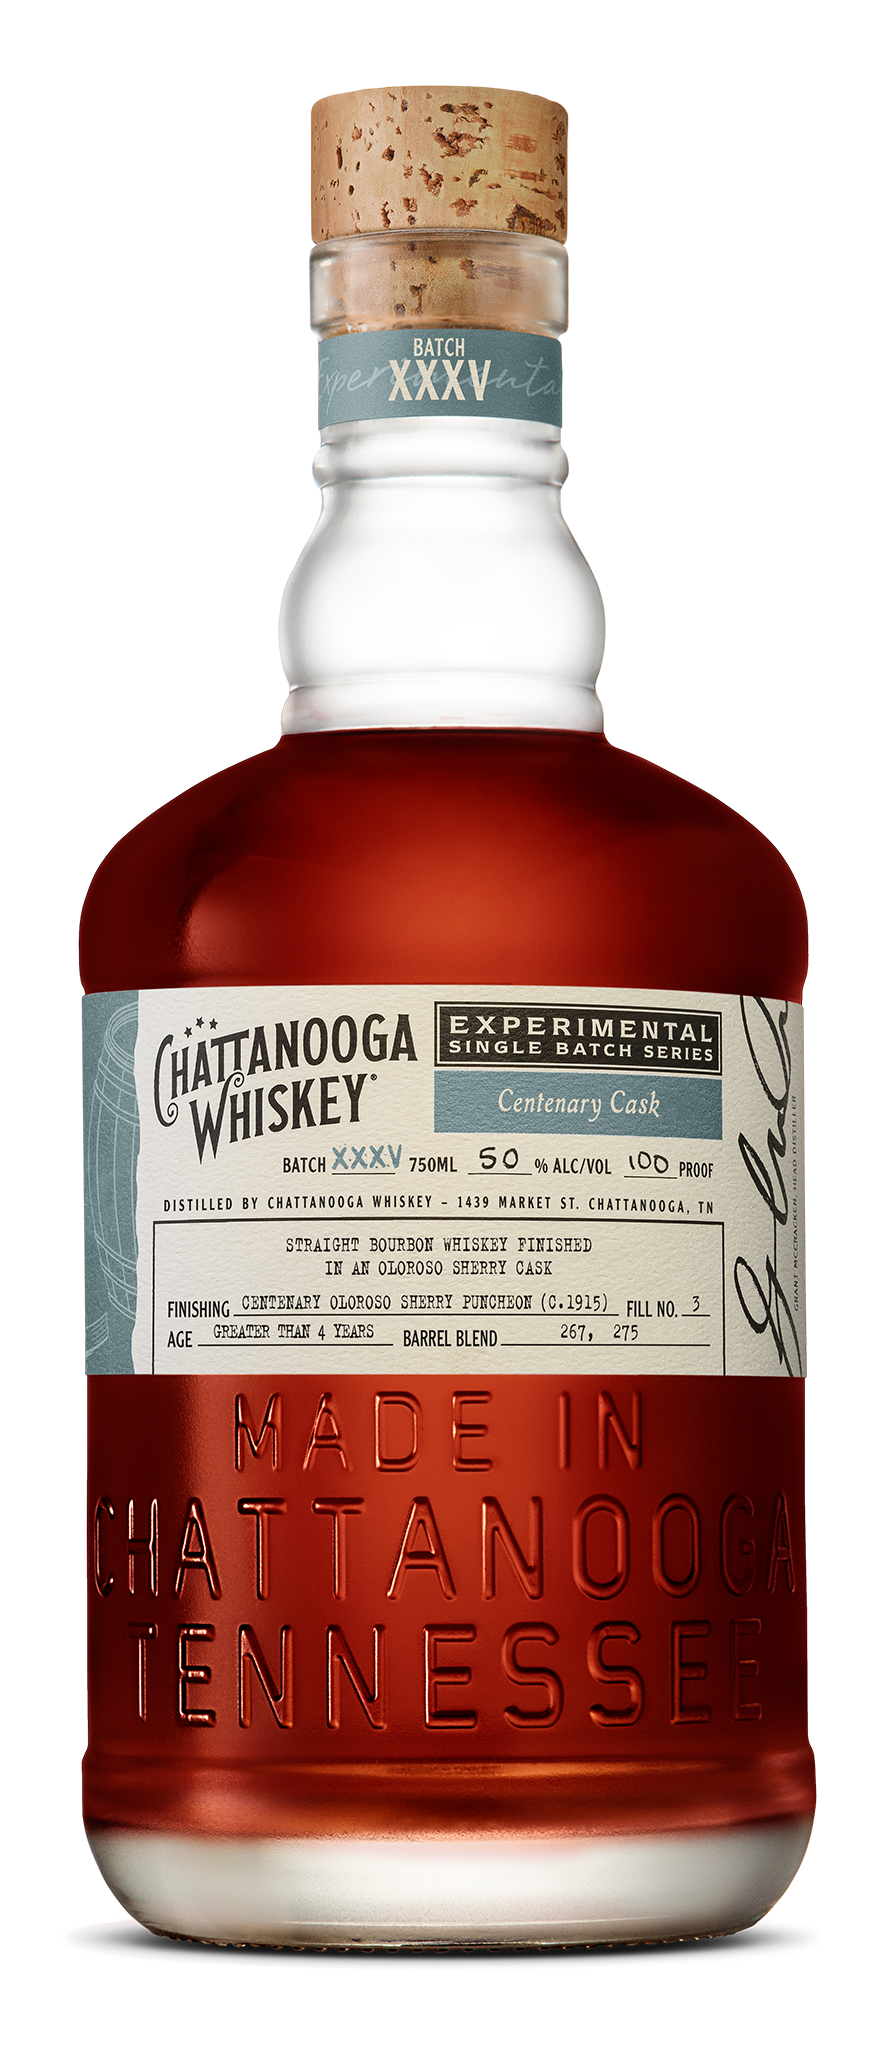 THE WHISKEY WASH: WHISKEY REVIEW: CHATTANOOGA WHISKEY BATCH 035: CENTENARY CASK